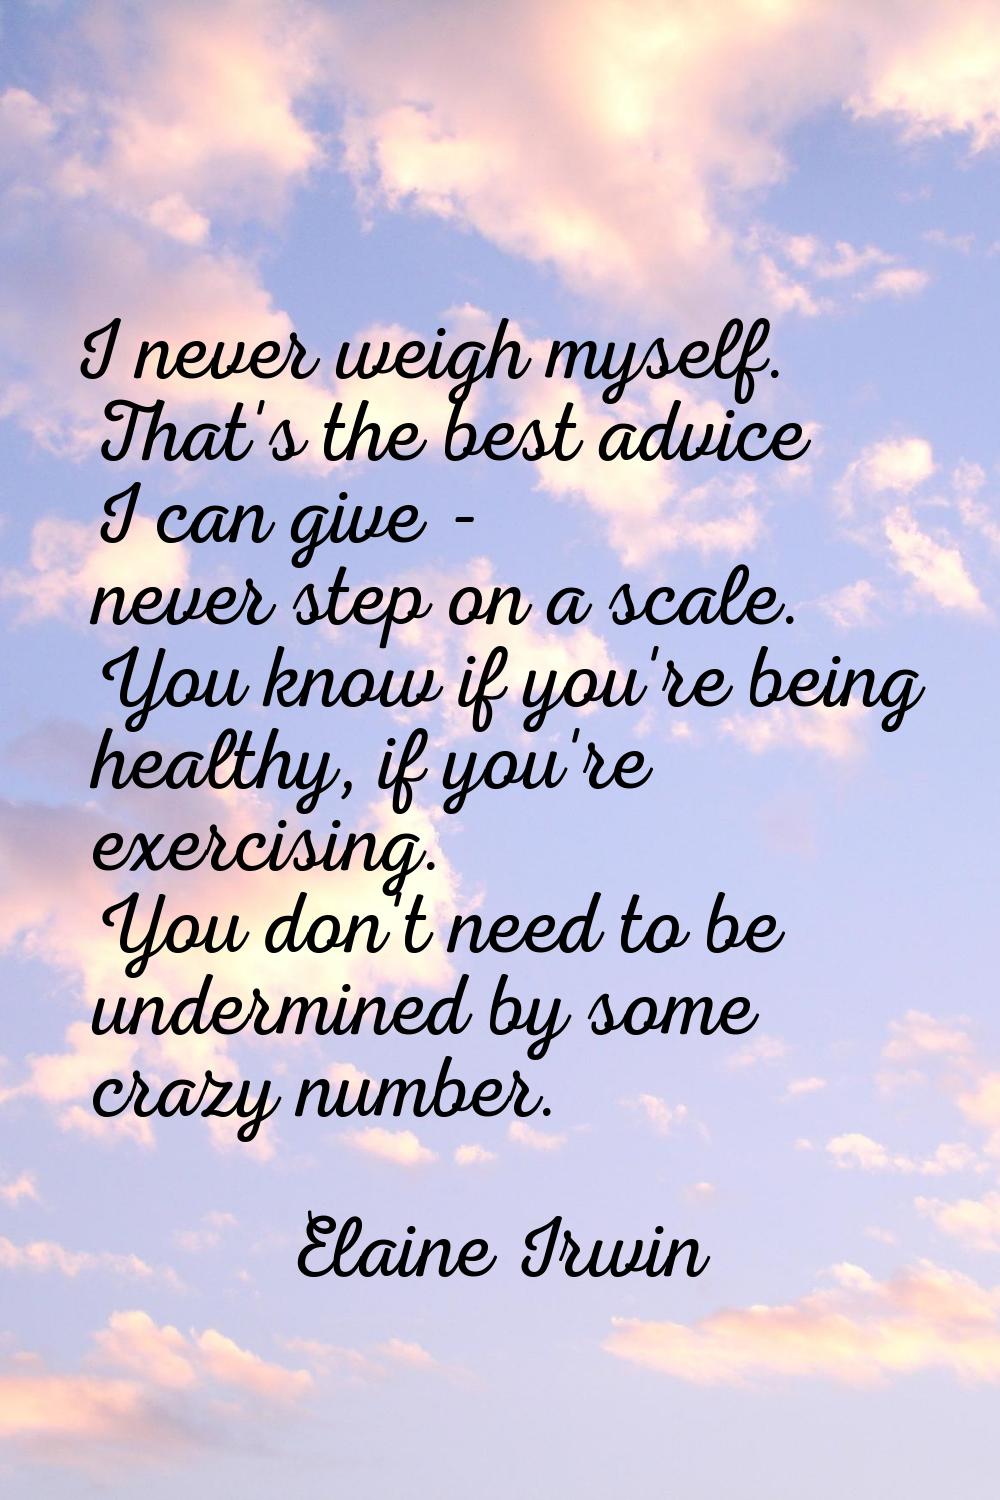 I never weigh myself. That's the best advice I can give - never step on a scale. You know if you're